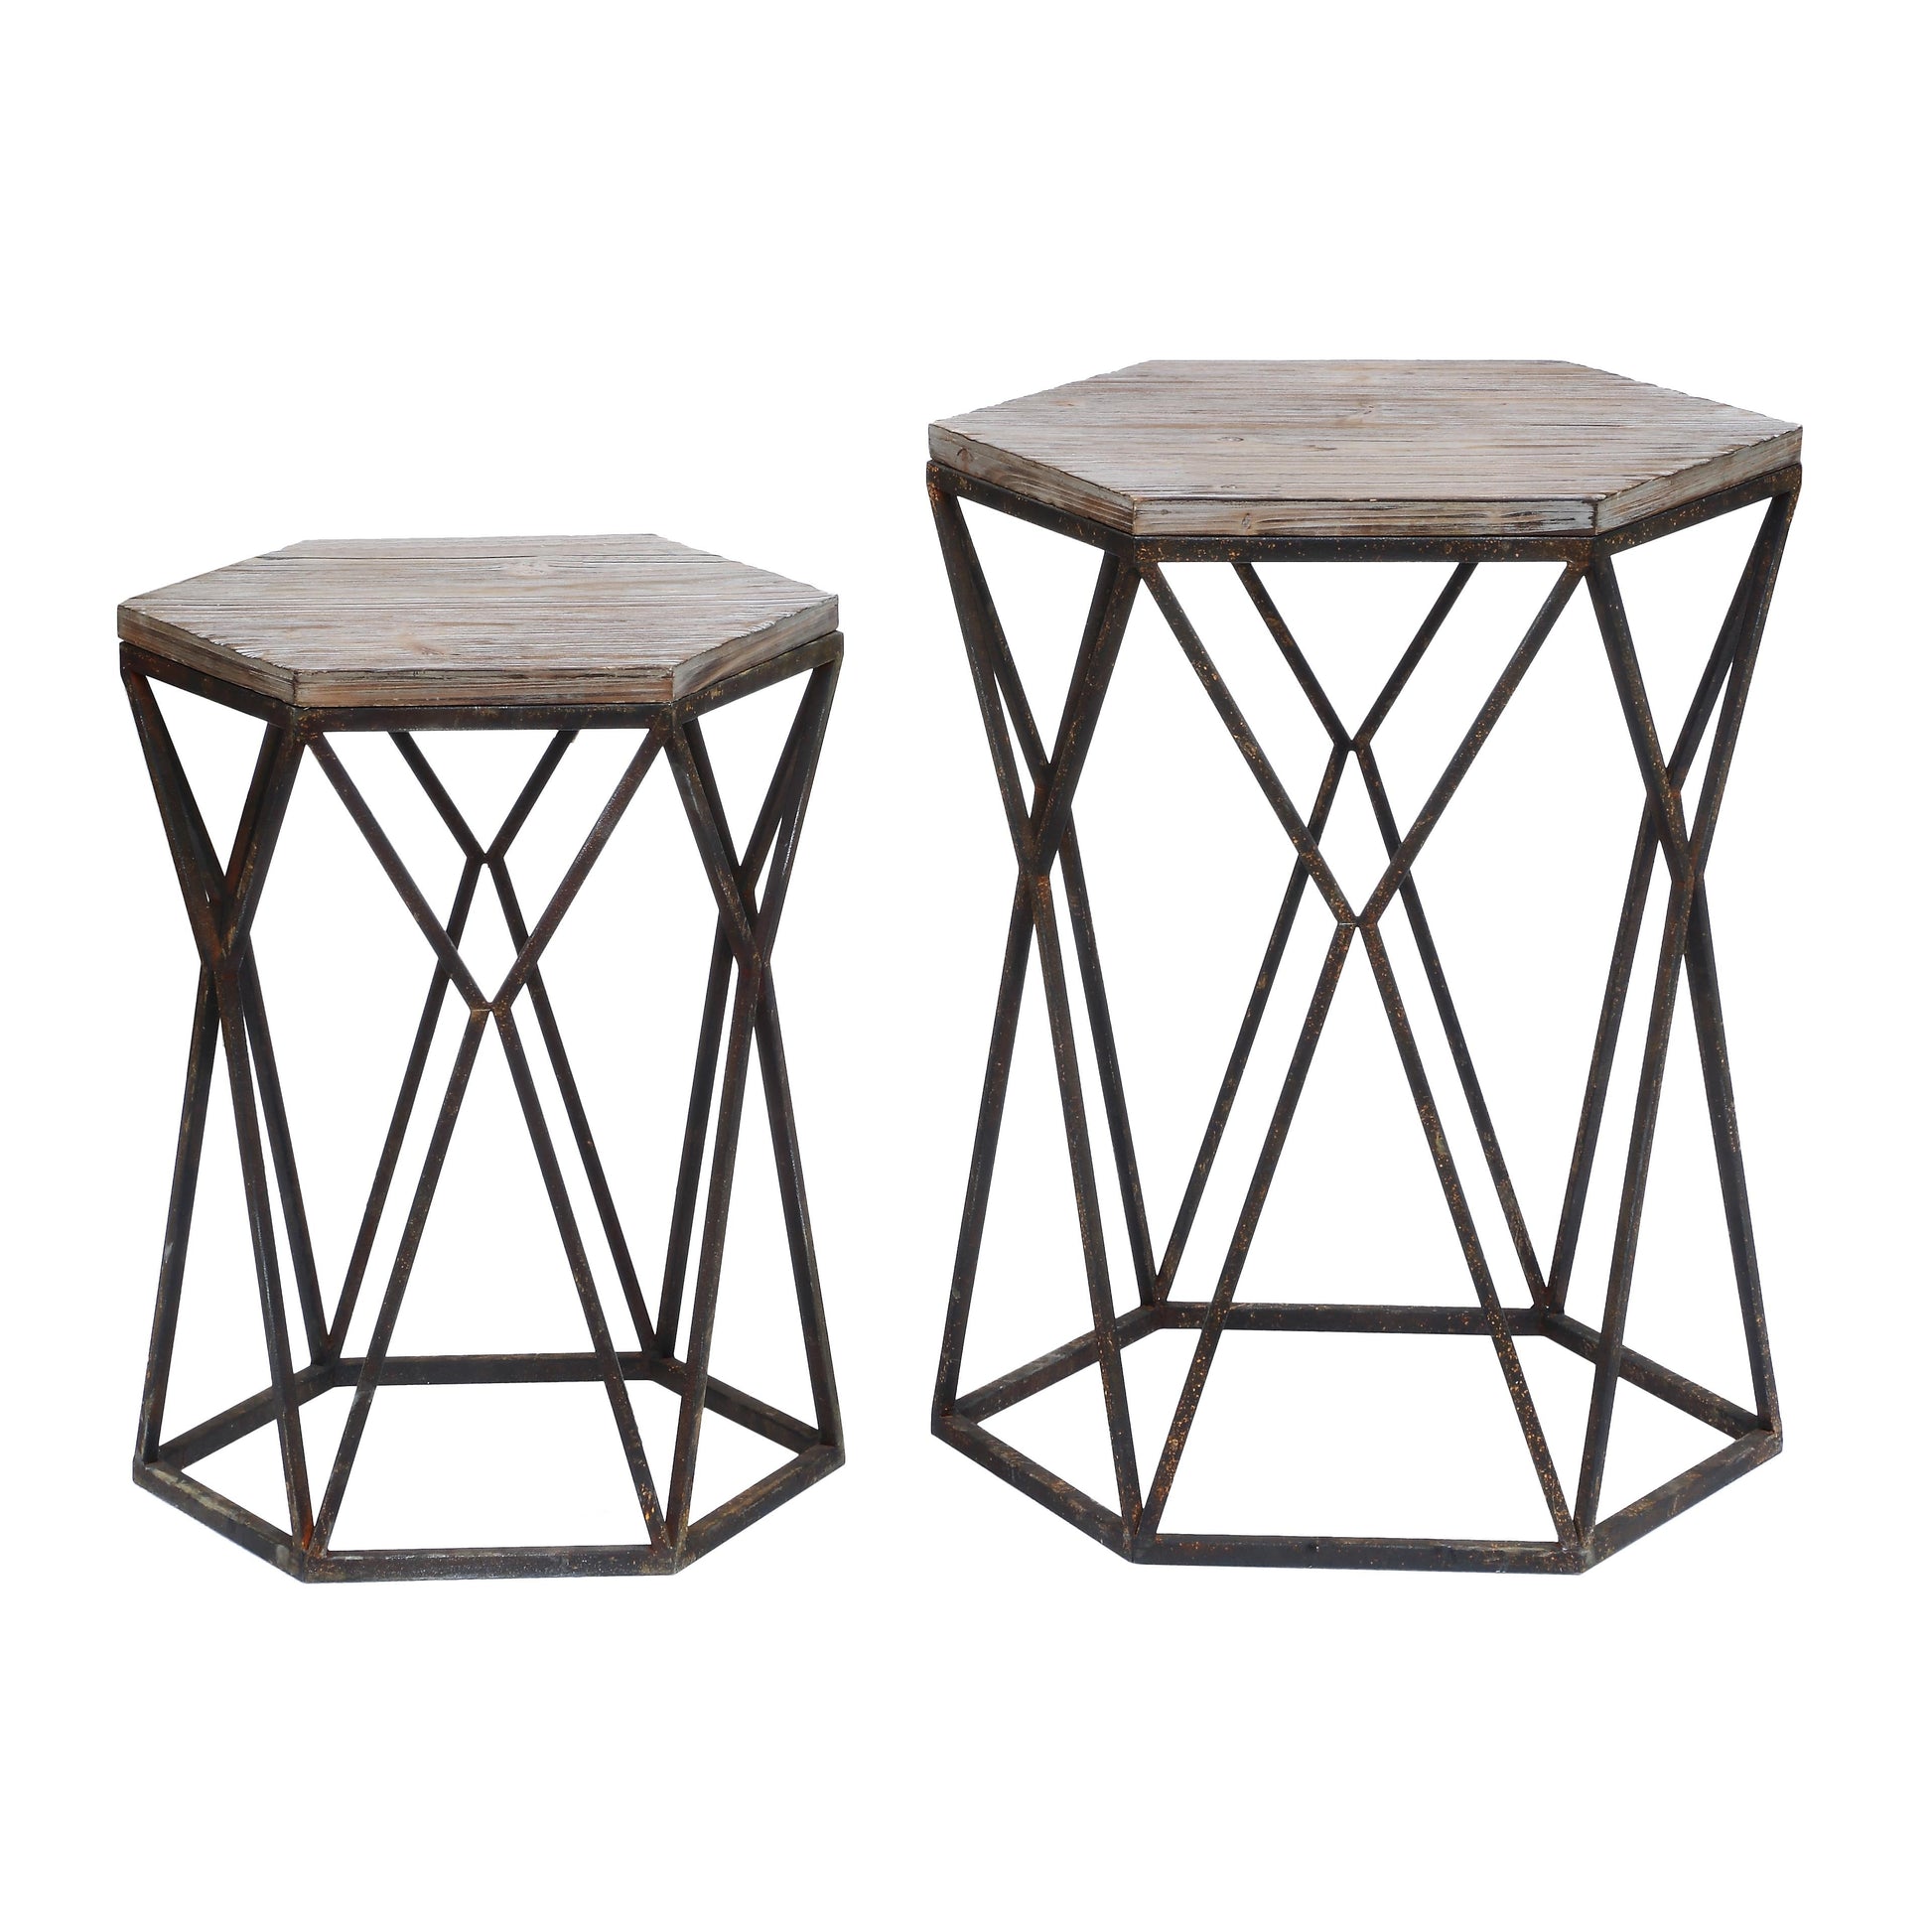 Crestview Collection Buena Vista 22” x 20” x 27” & 18” x 16” x 23” Rustic Metal And Mood Set of Tables In Natural Wood and Black Finish